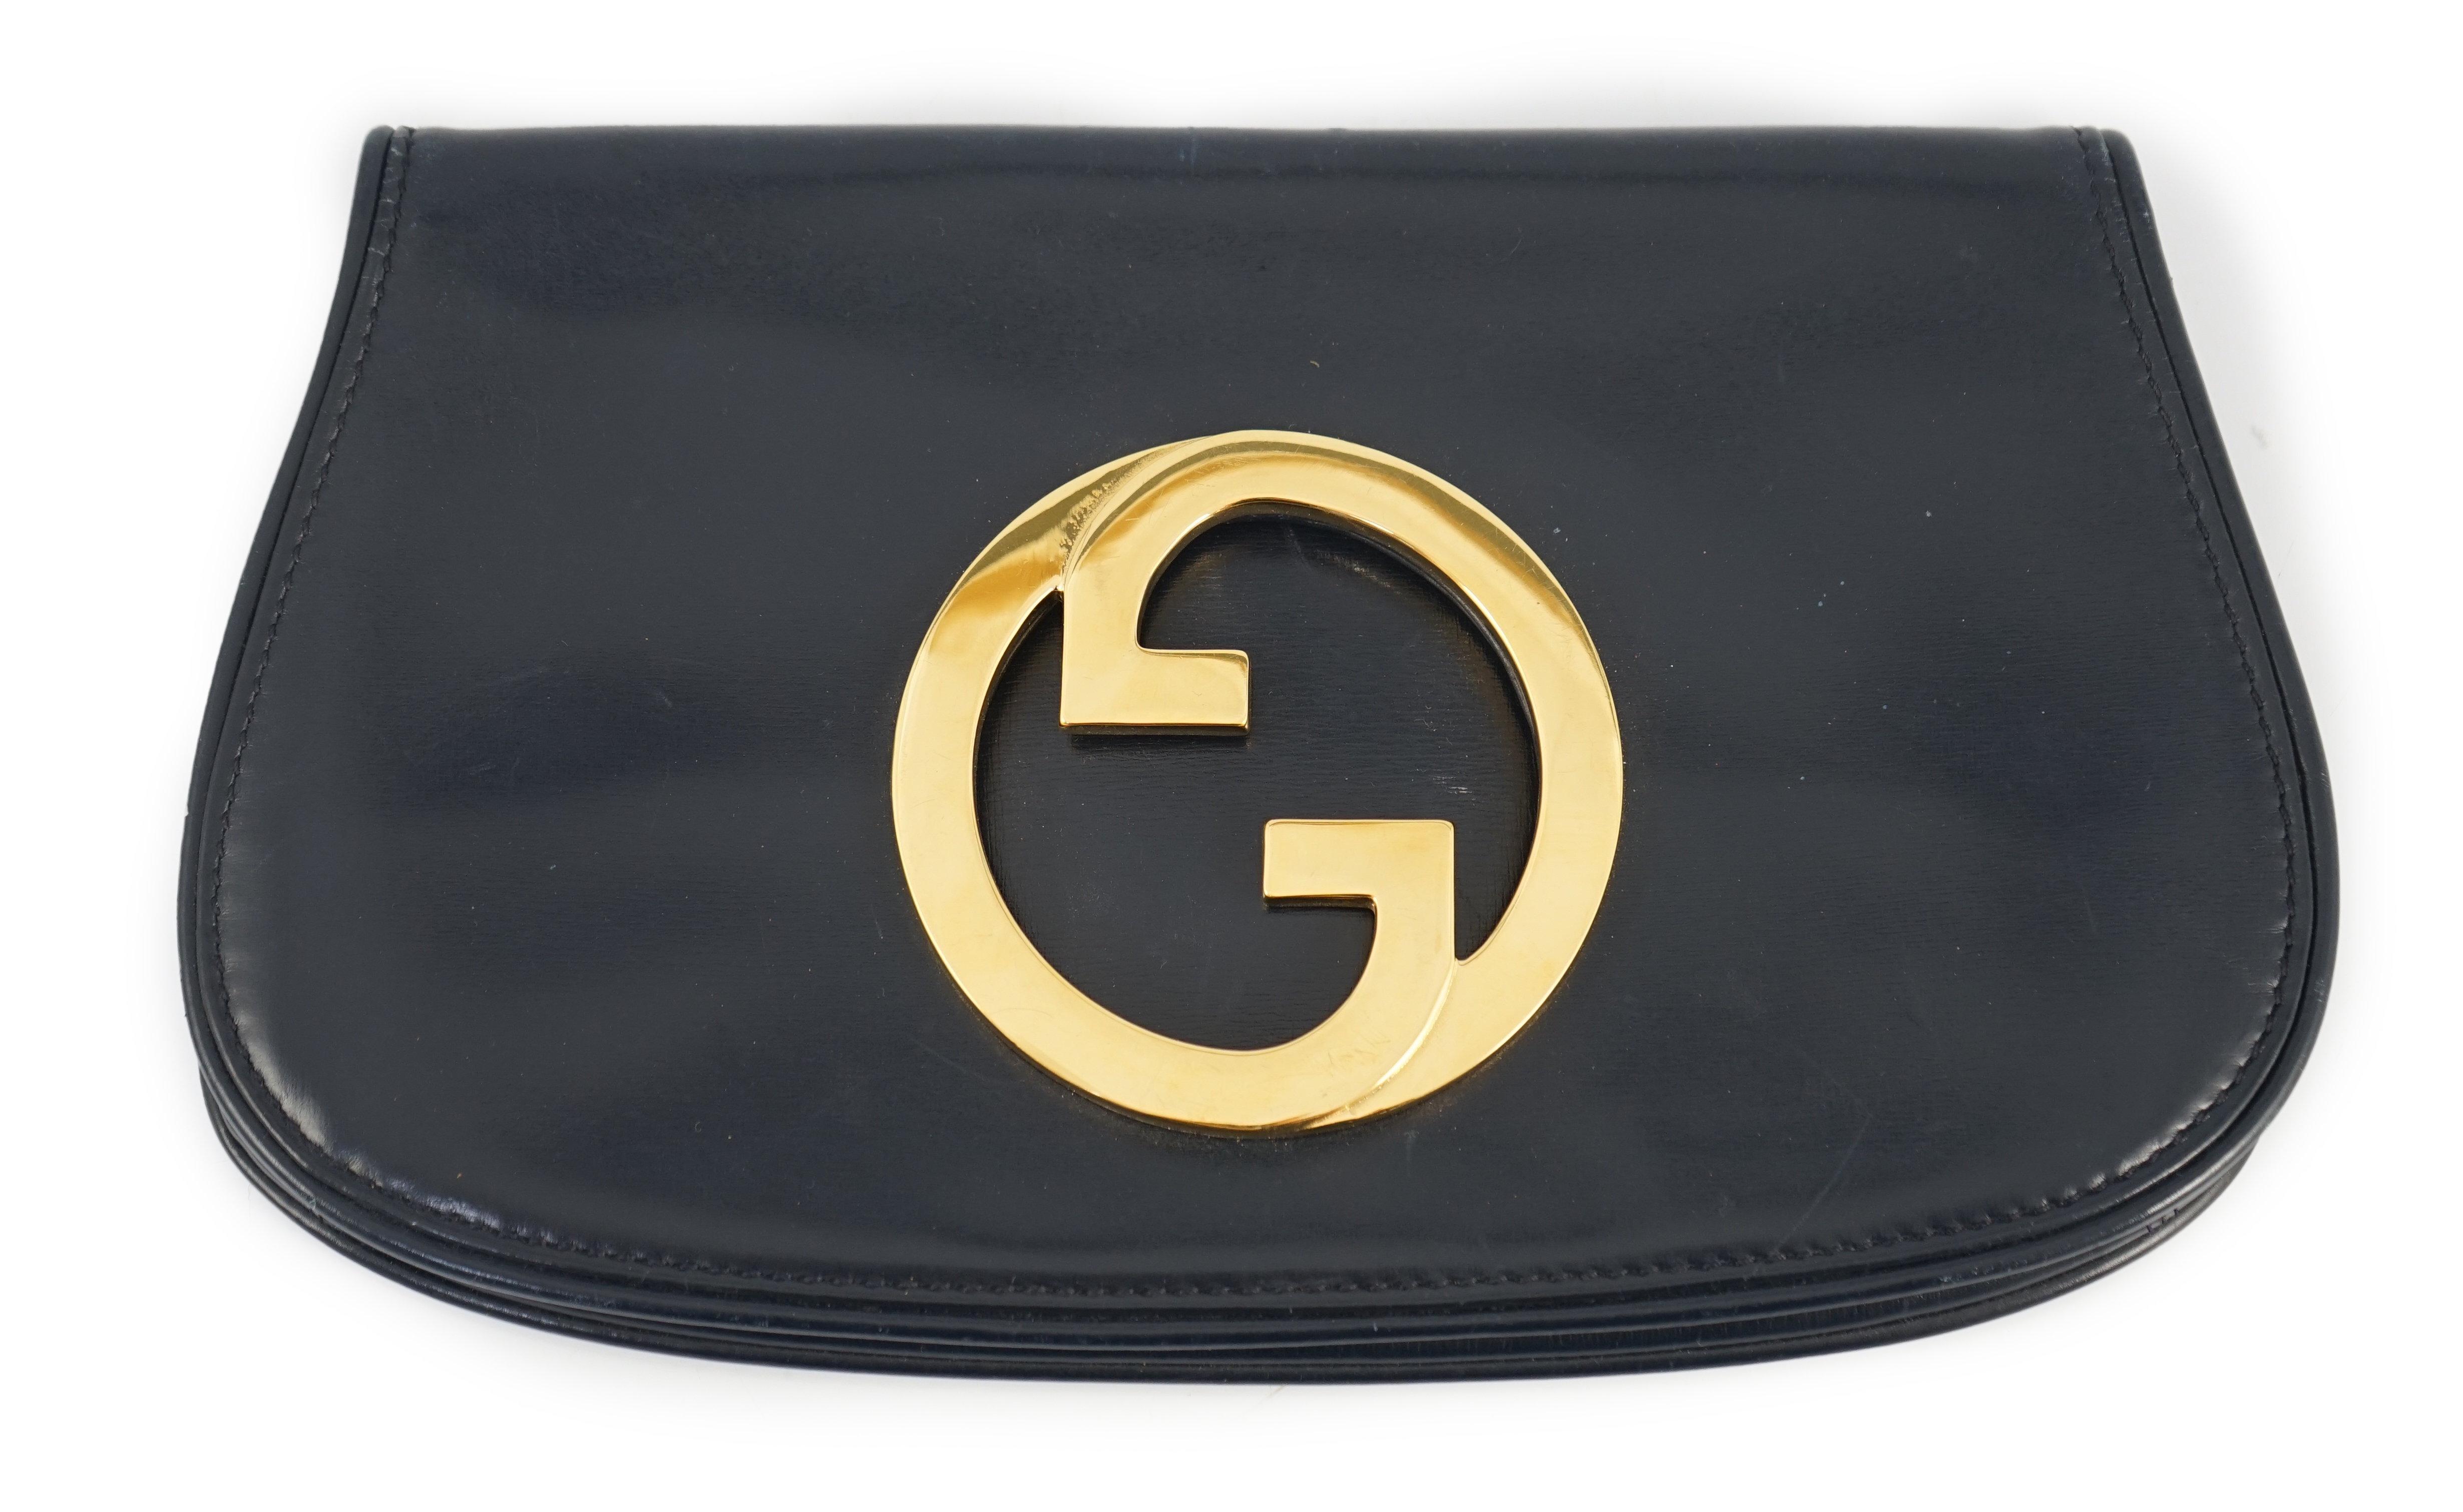 A vintage Gucci Blondie Unicorn navy leather clutch bag, Gold Gucci front logo, weighted closure,